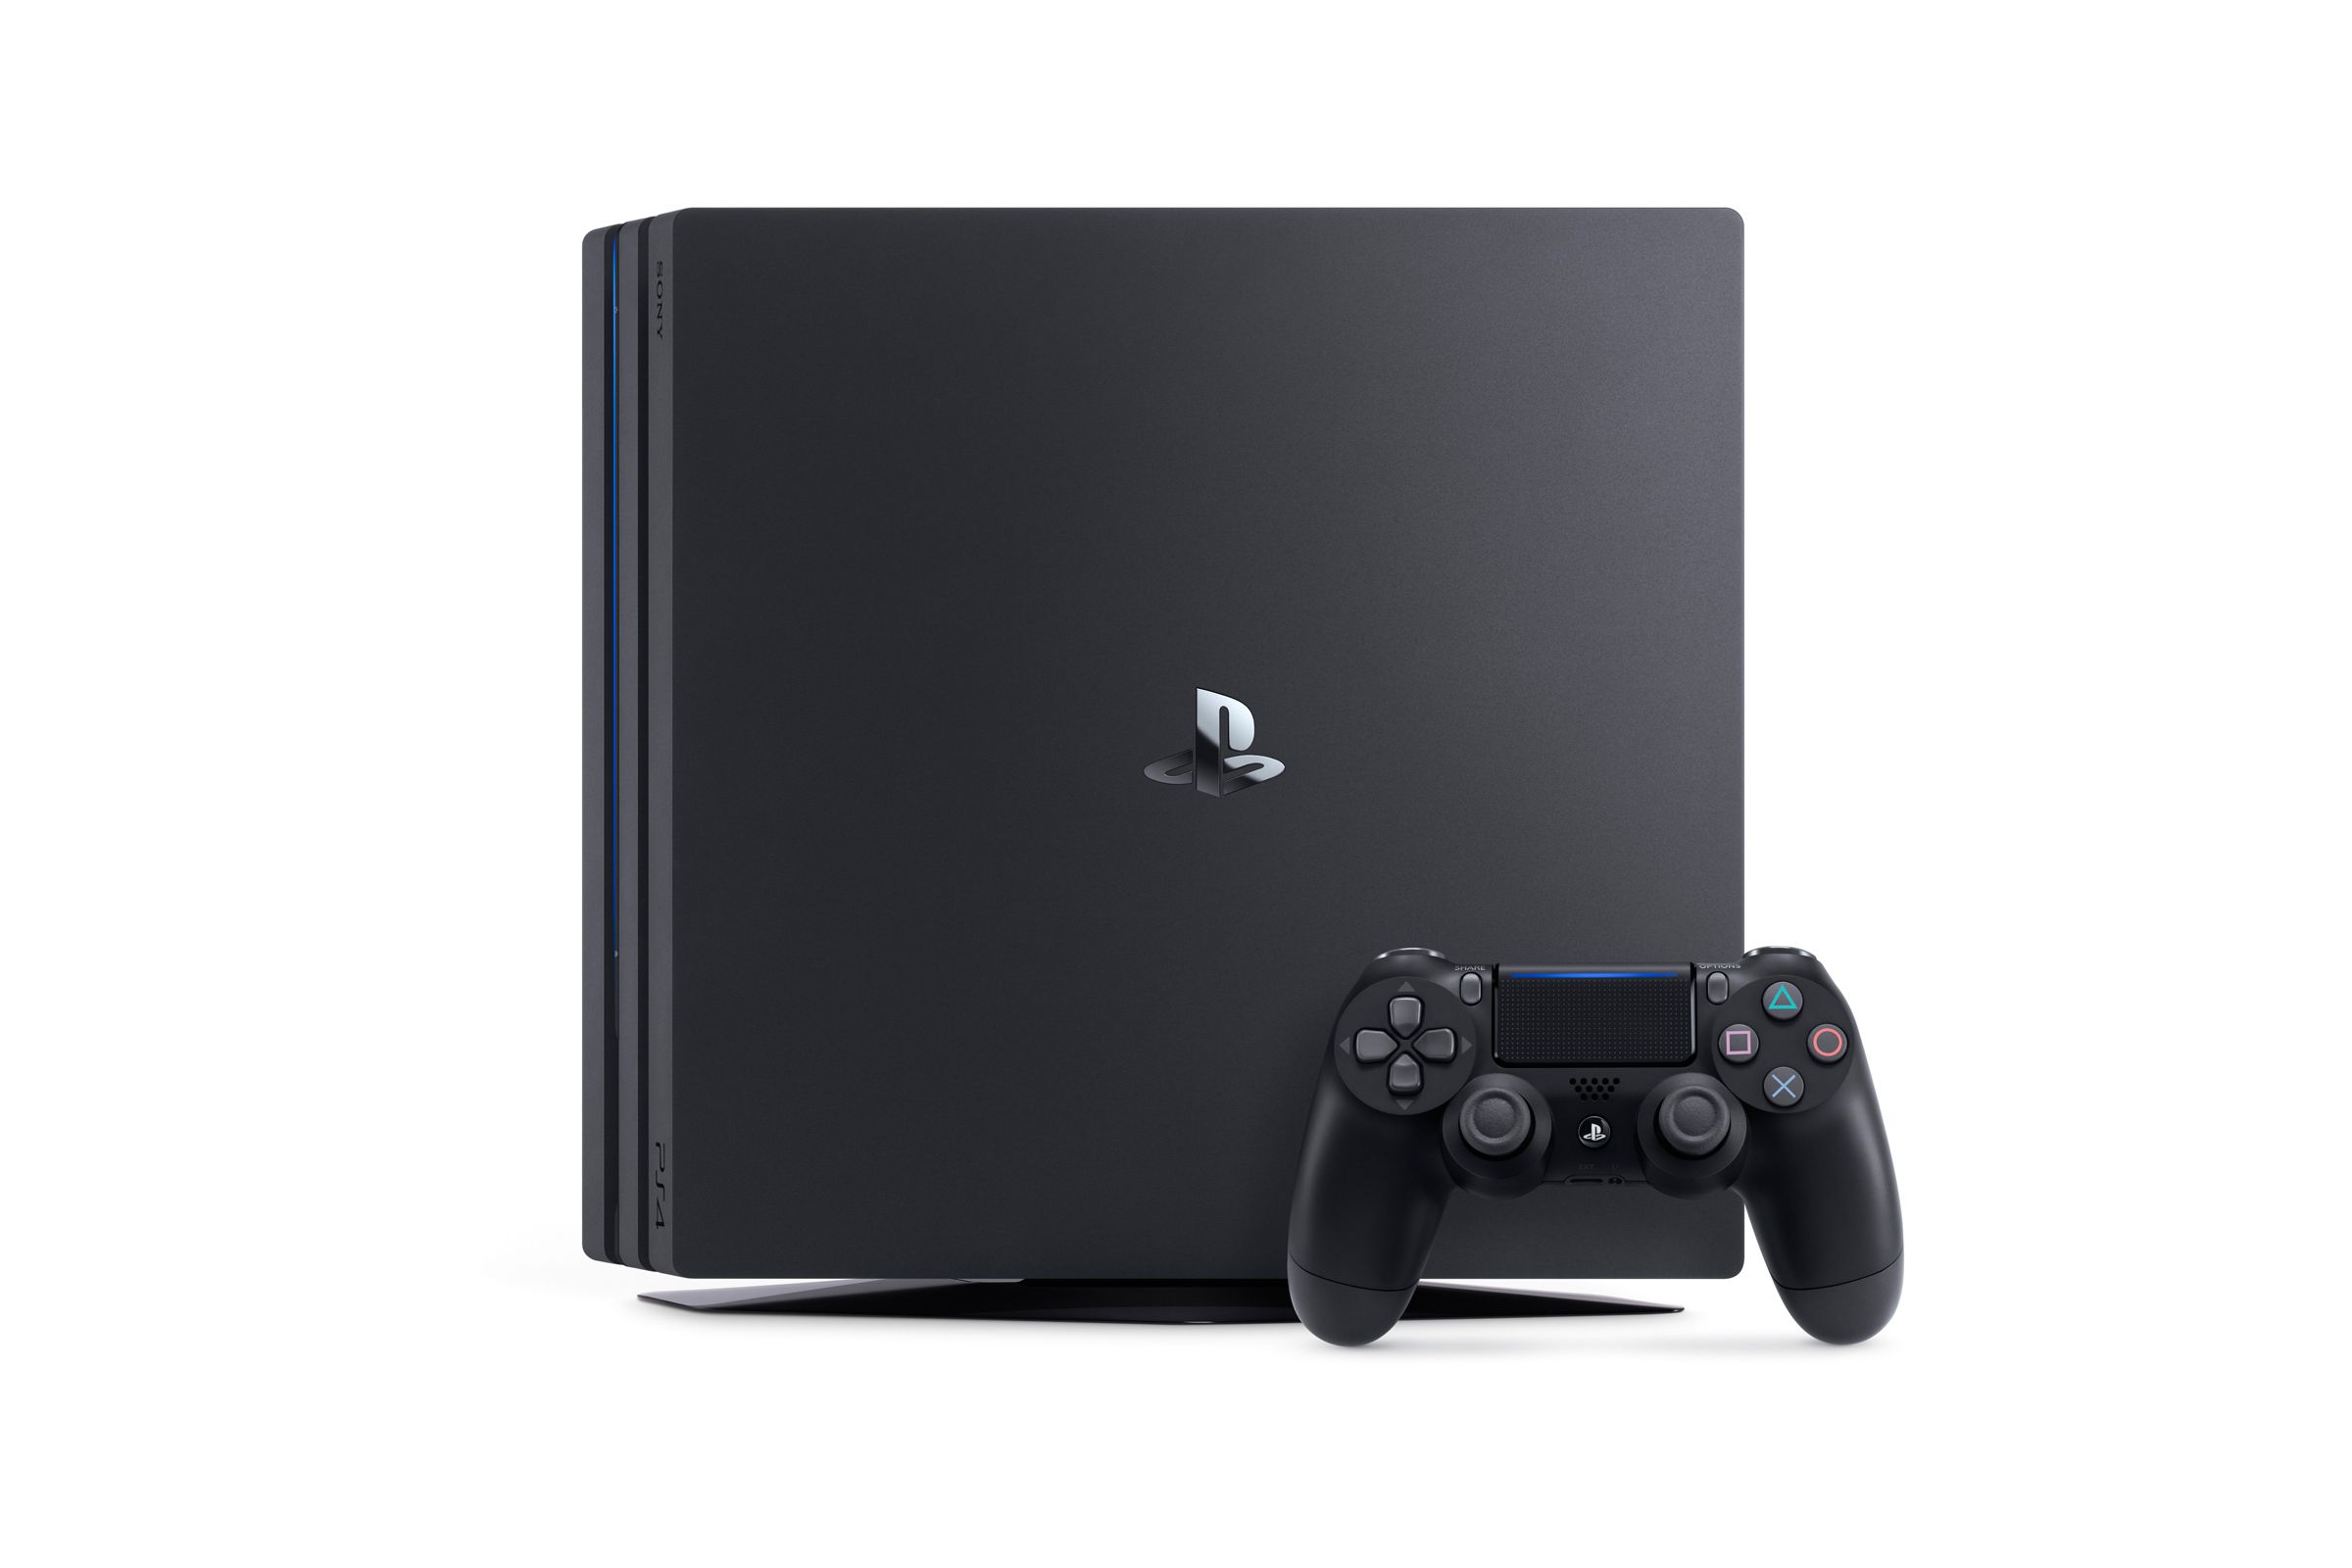 where can i get a cheap playstation 4